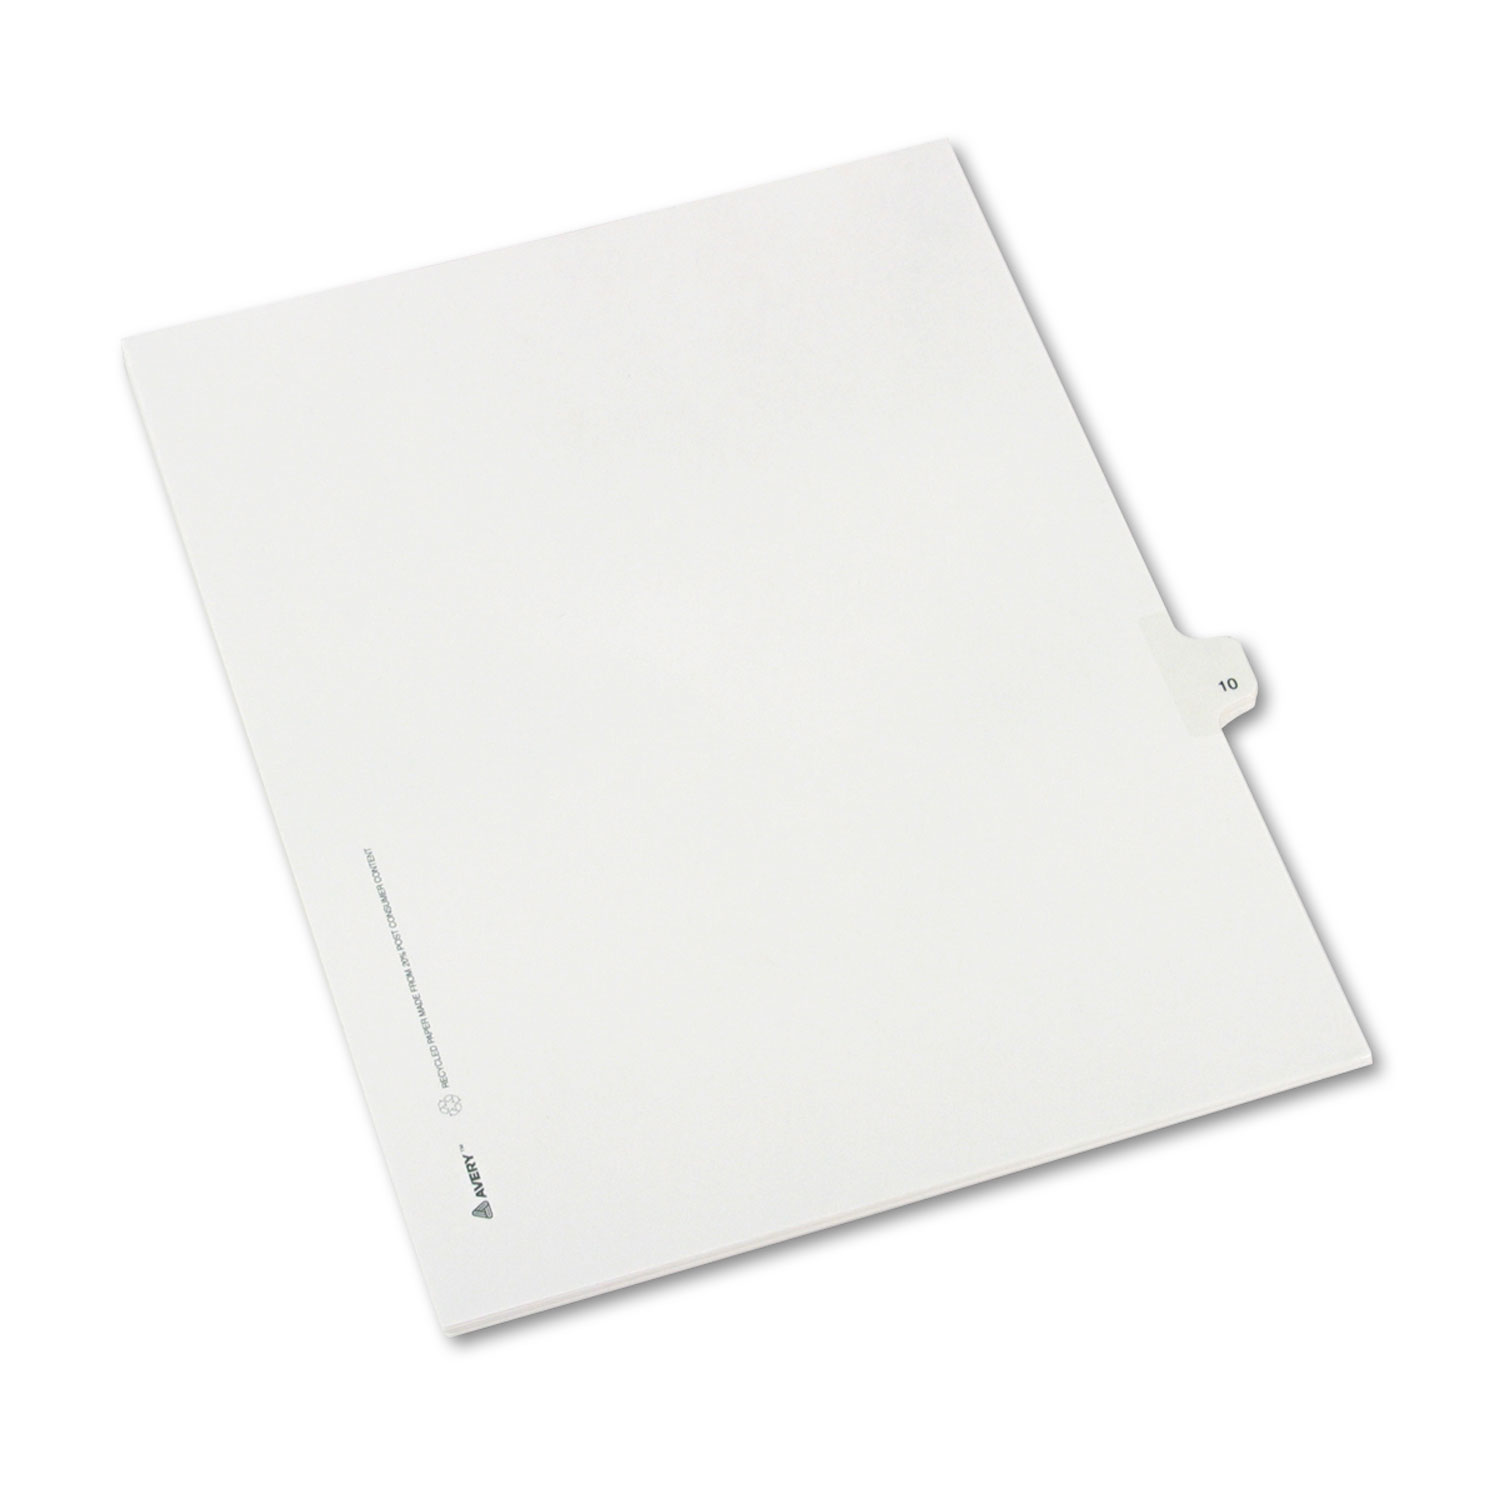 Allstate-Style Legal Exhibit Side Tab Divider, Title: 10, Letter, White, 25/Pack